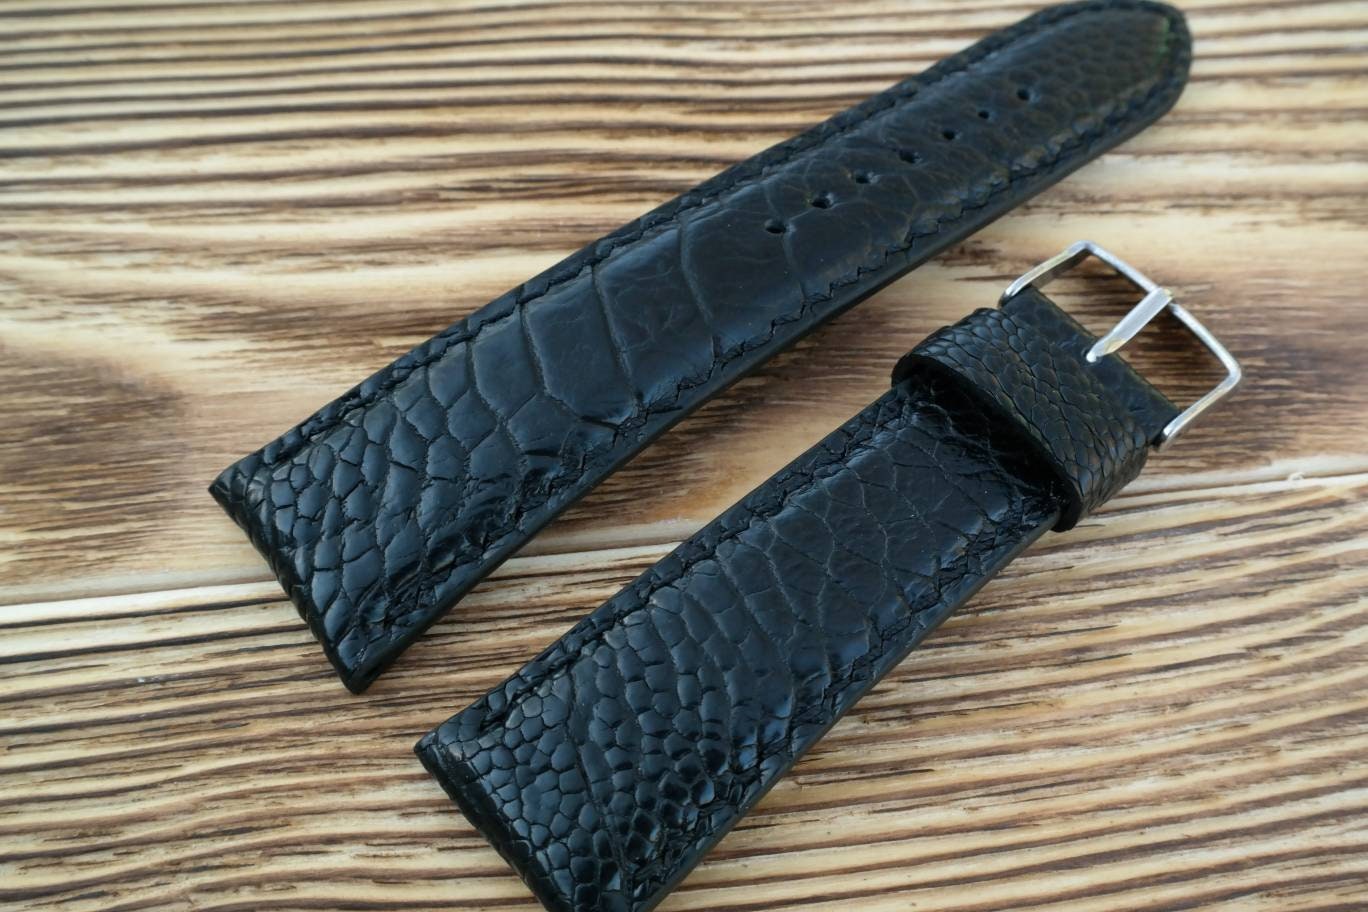 Black ostrich's paws leather watch band leather watch band 16mm men's watch strap 22mm 20mm 18mm 24mm watch bands ladies ostrich watch bands